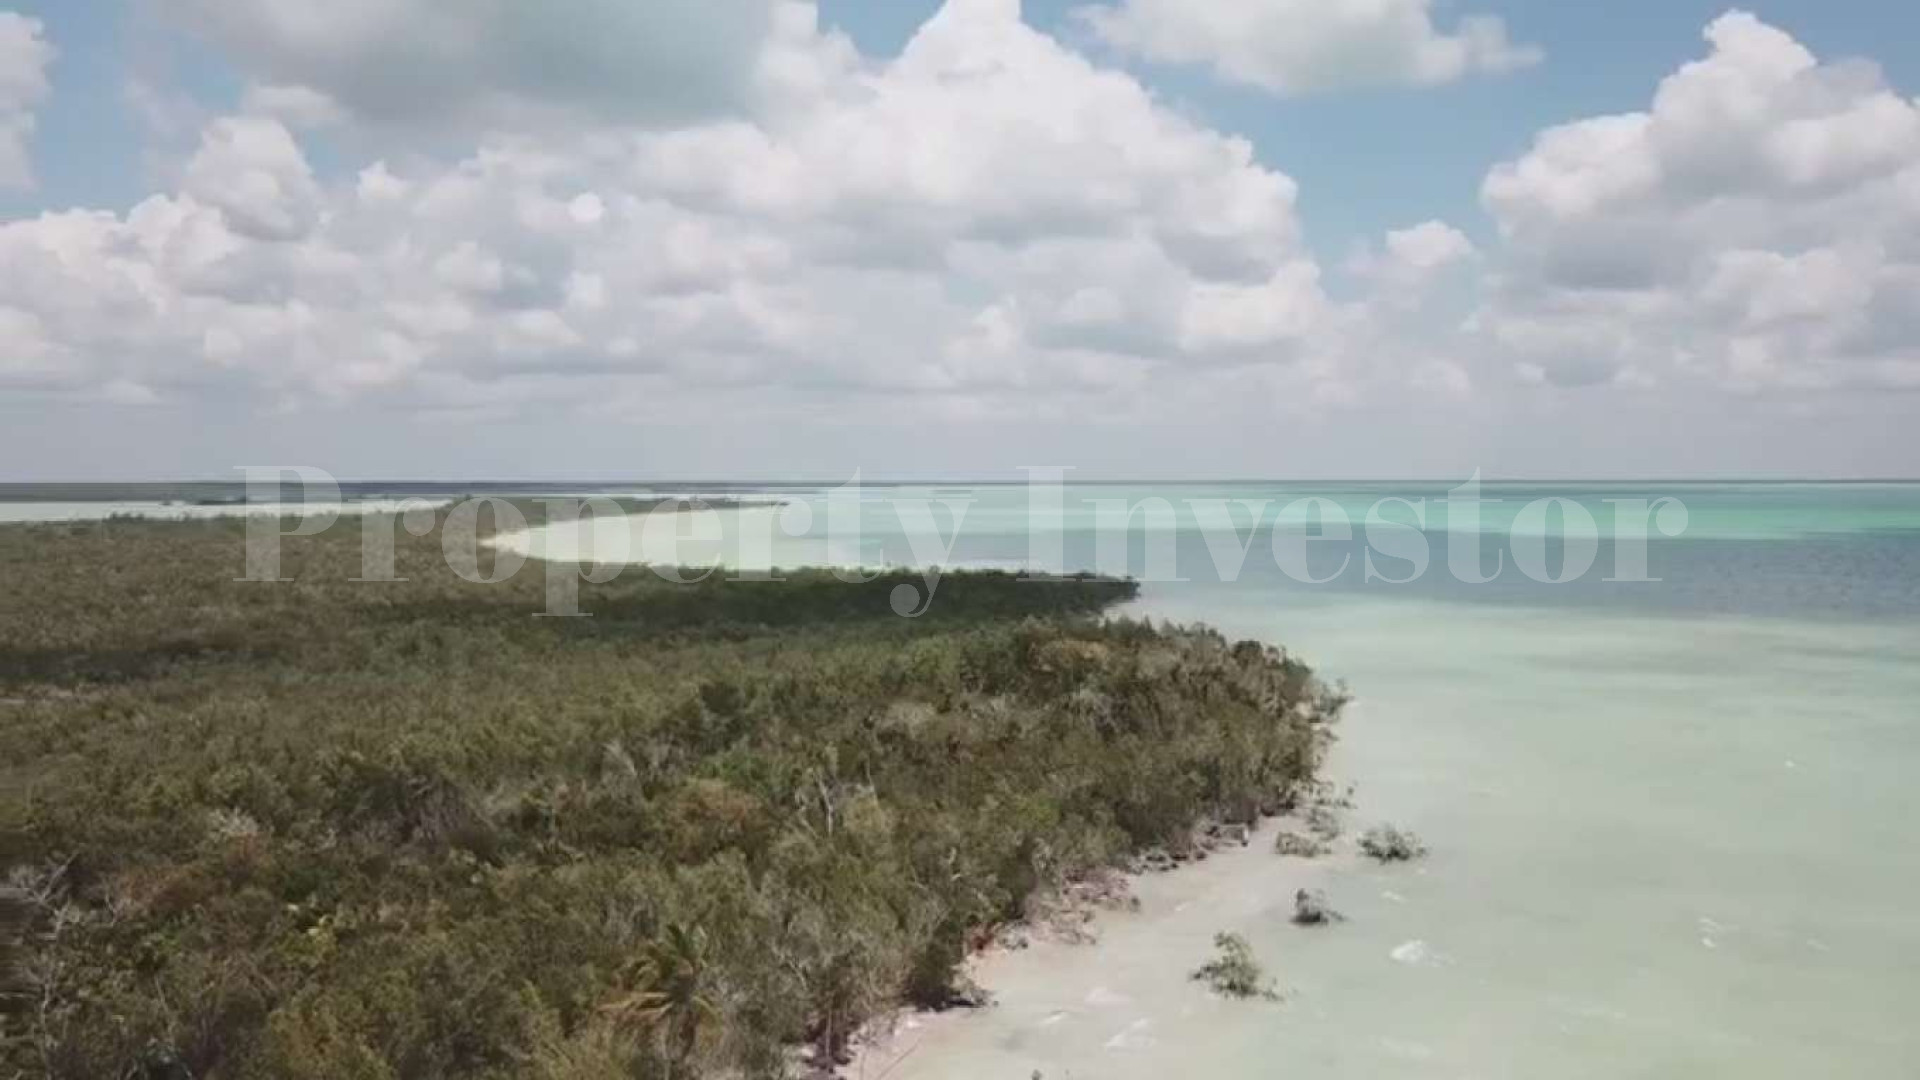 129 Hectare Private Island with Plans for Commercial Development for Sale in Mexico